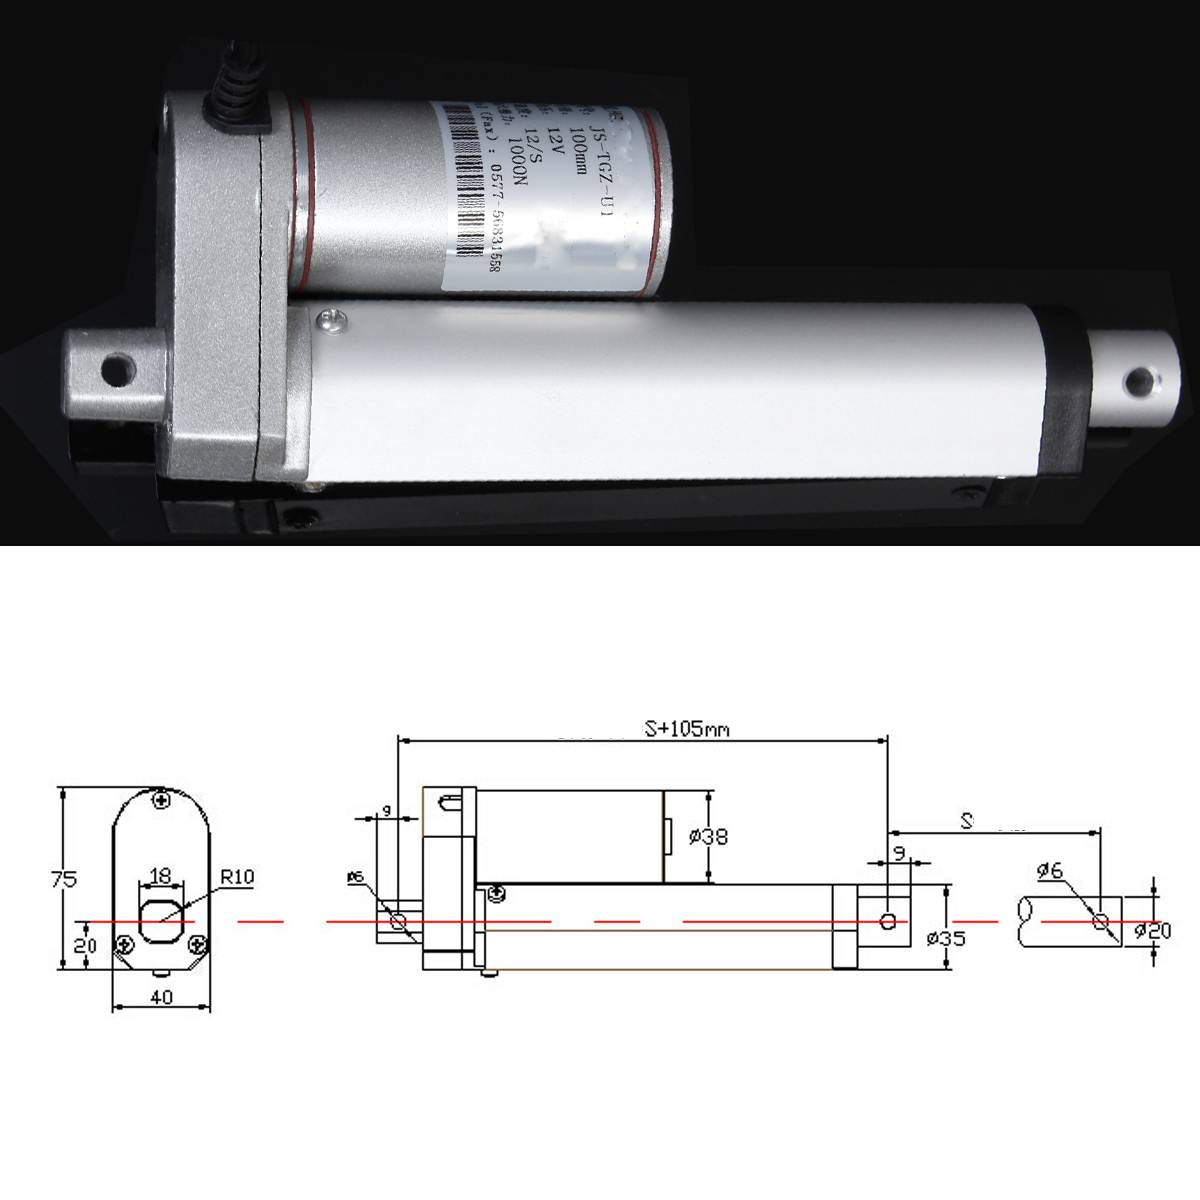 DC 12V Electric Linear Actuator 1000N 50-500mm Stroke Linear Motor Controller 12mm/s Electric Bracket 2"/4"/6"/8"/16"/20"